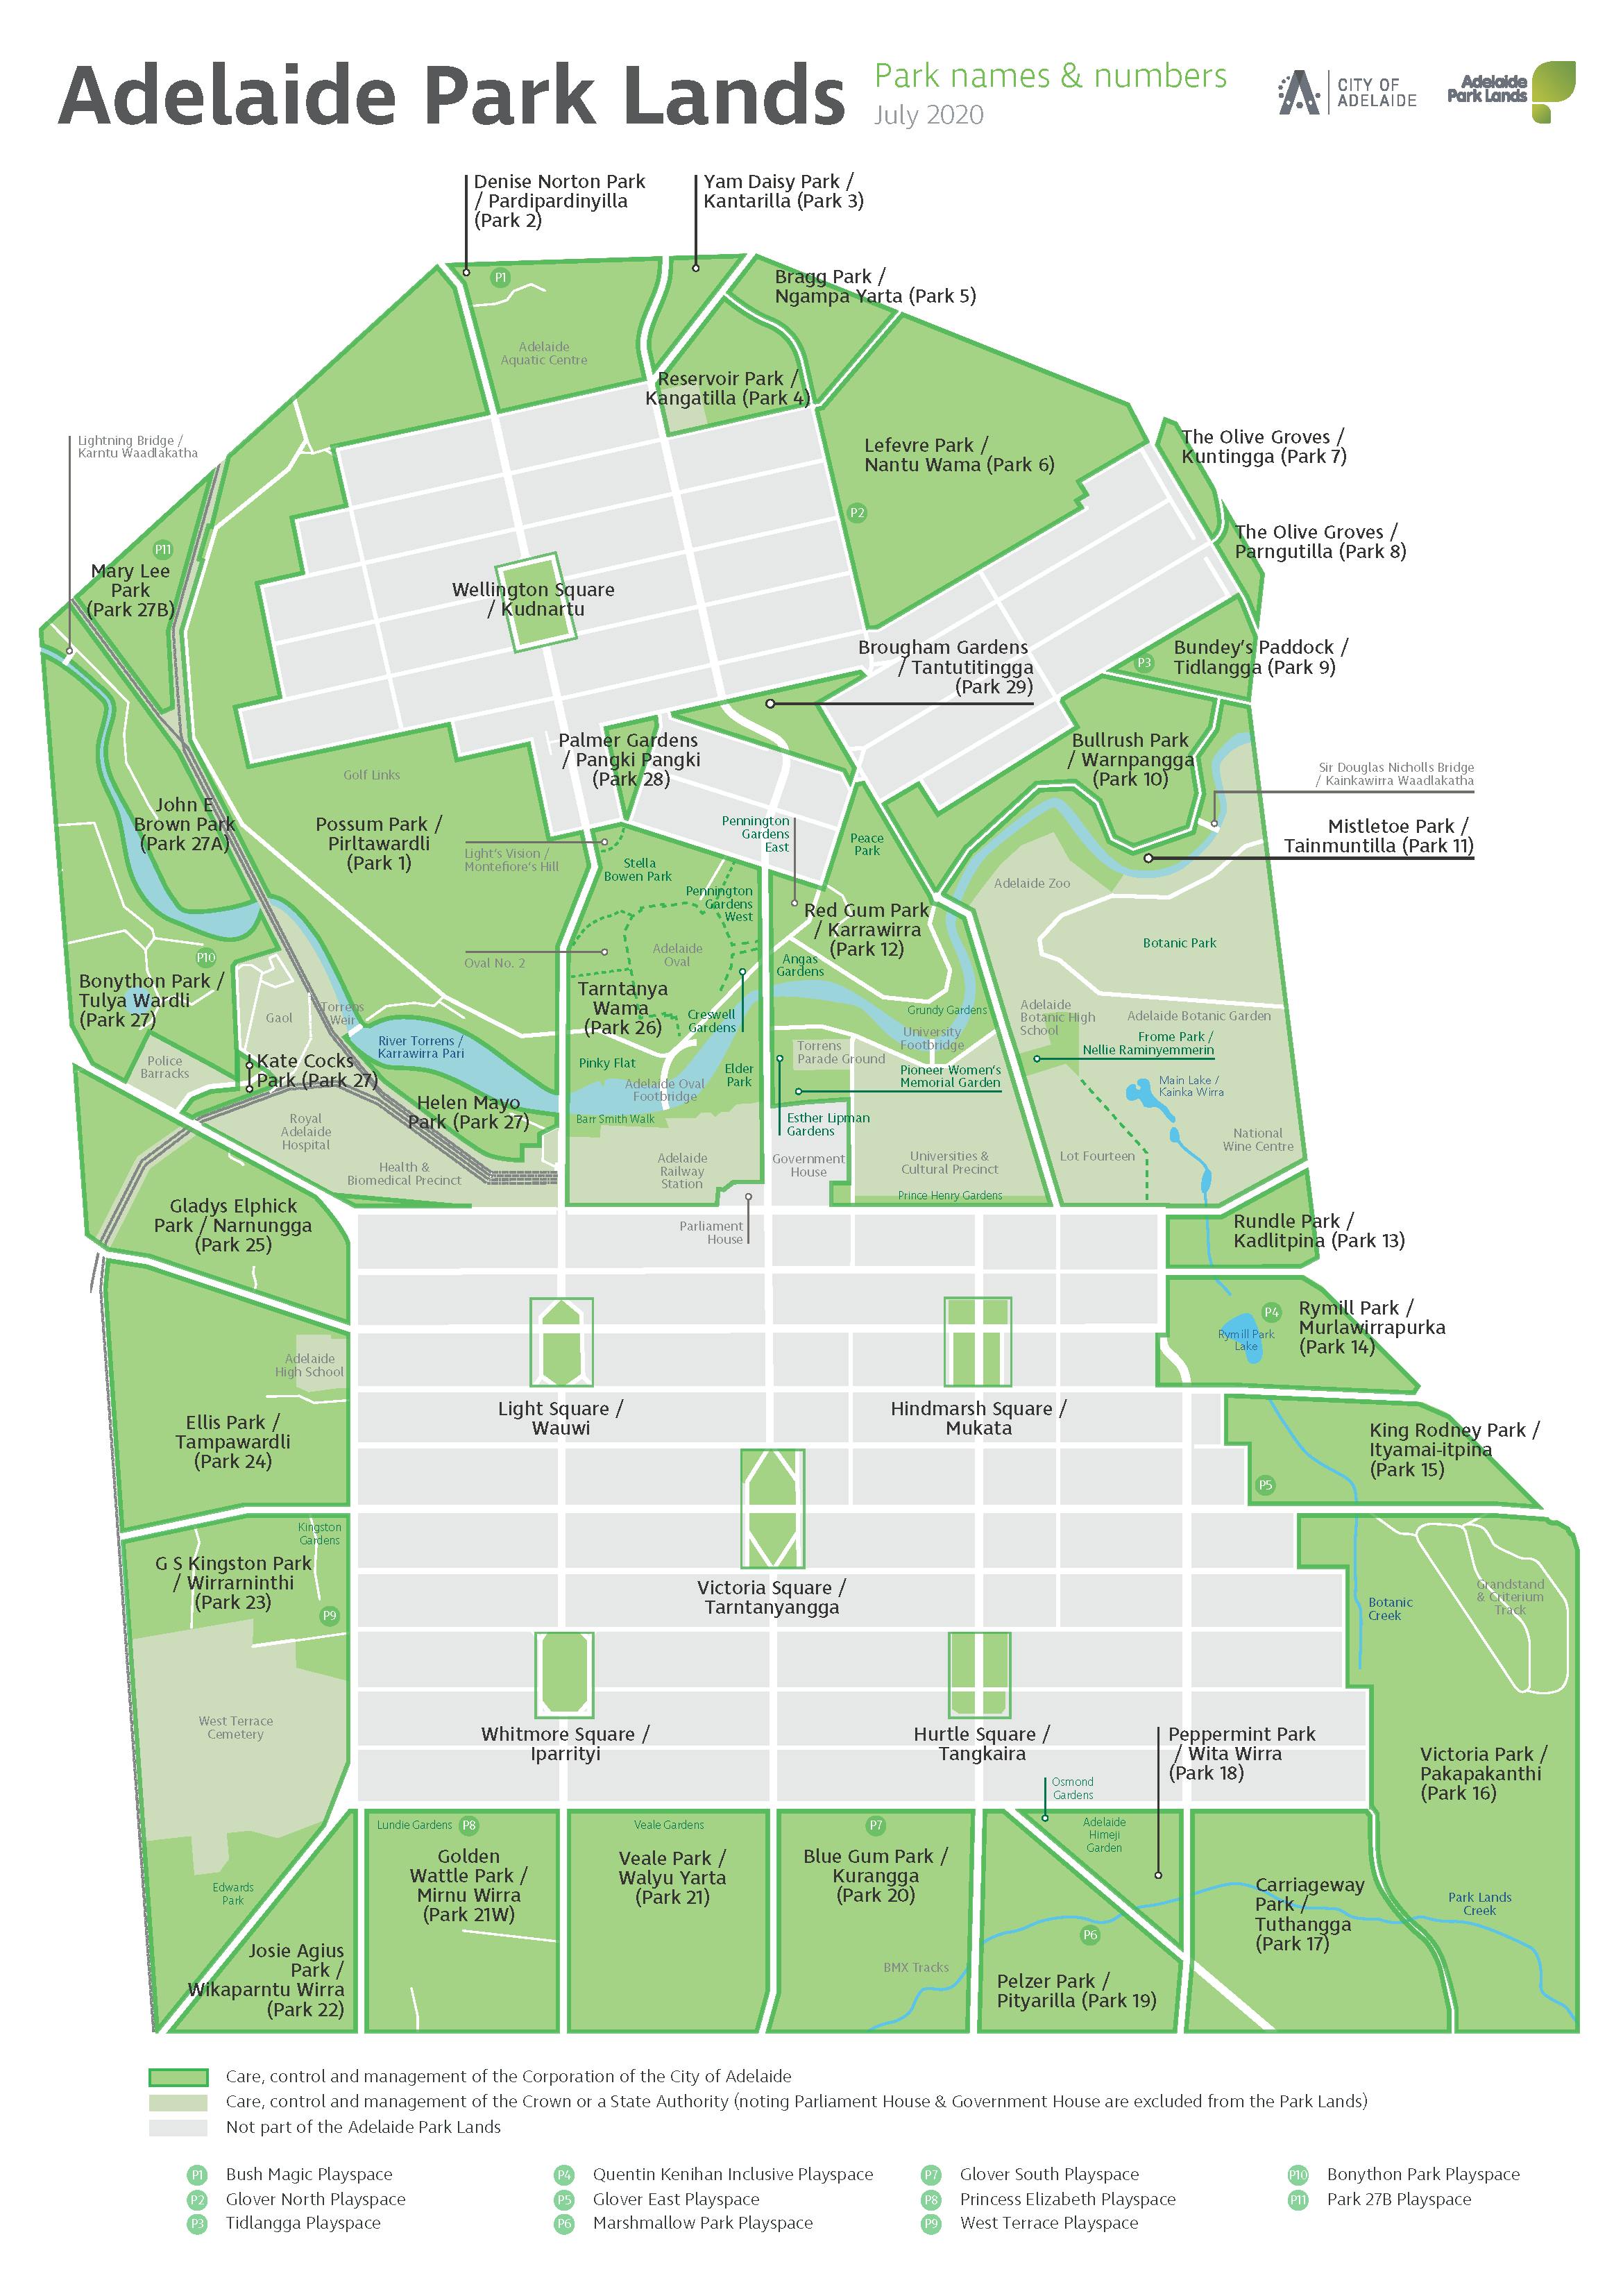 Names of individual parks and playspaces in the Adelaide Park Lands